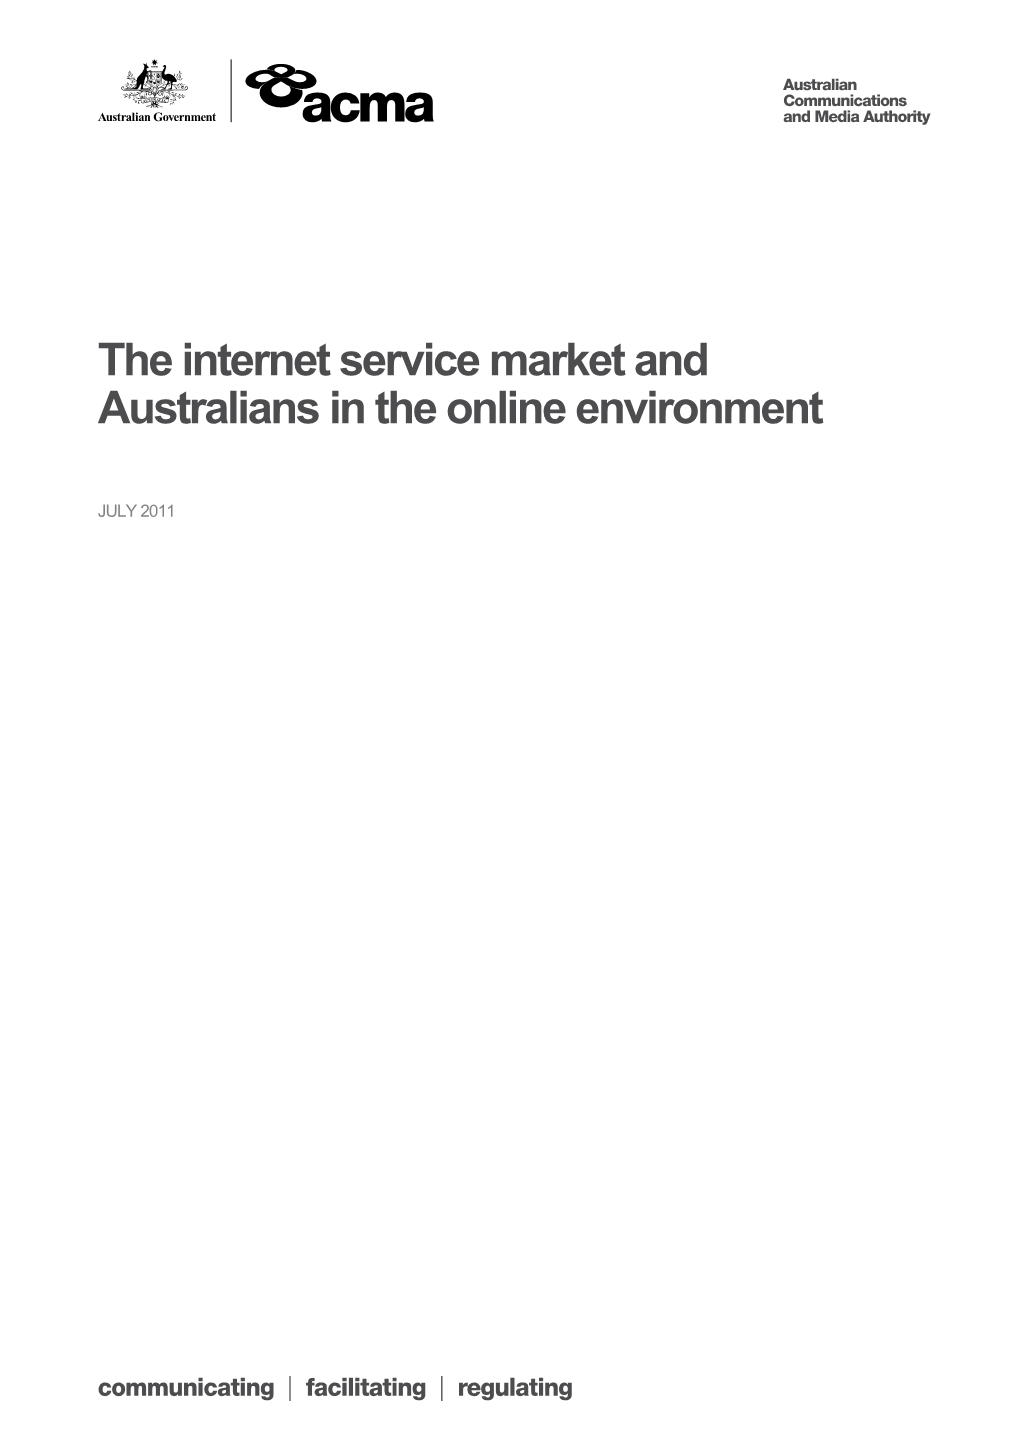 The Internet Service Market and Australians in the Online Environment